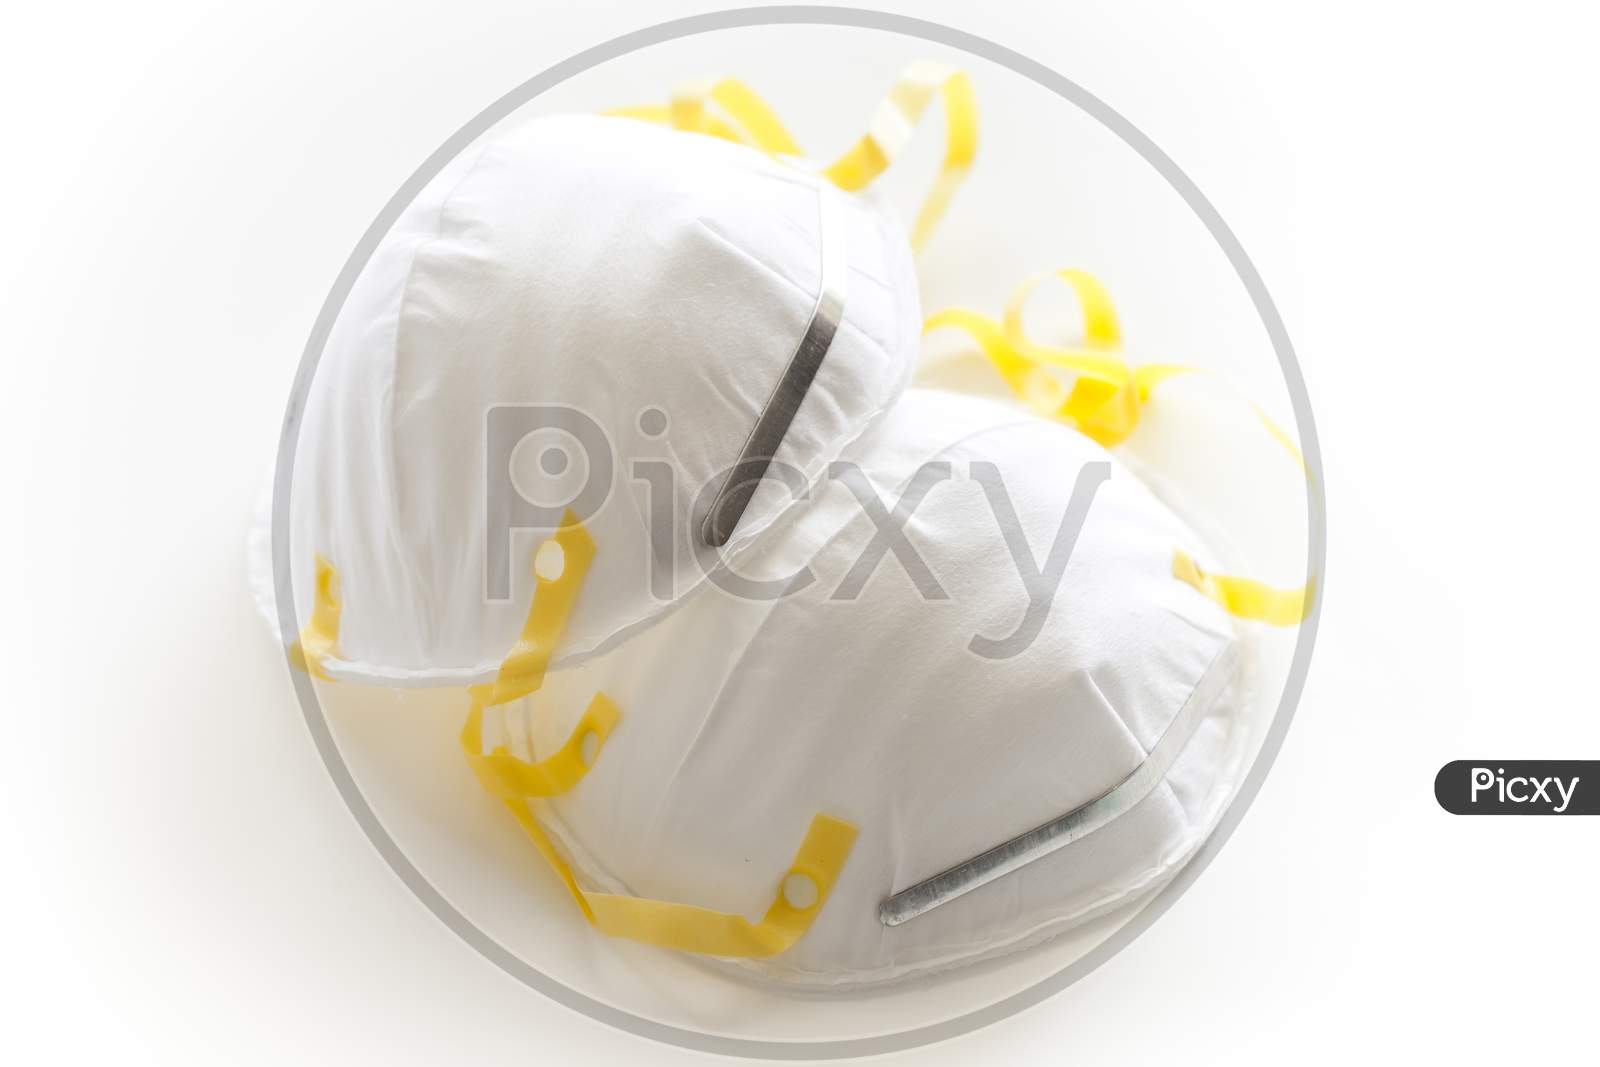 Protection face mask isolated, prevention of the spread of virus and pandemic COVID-19. White background